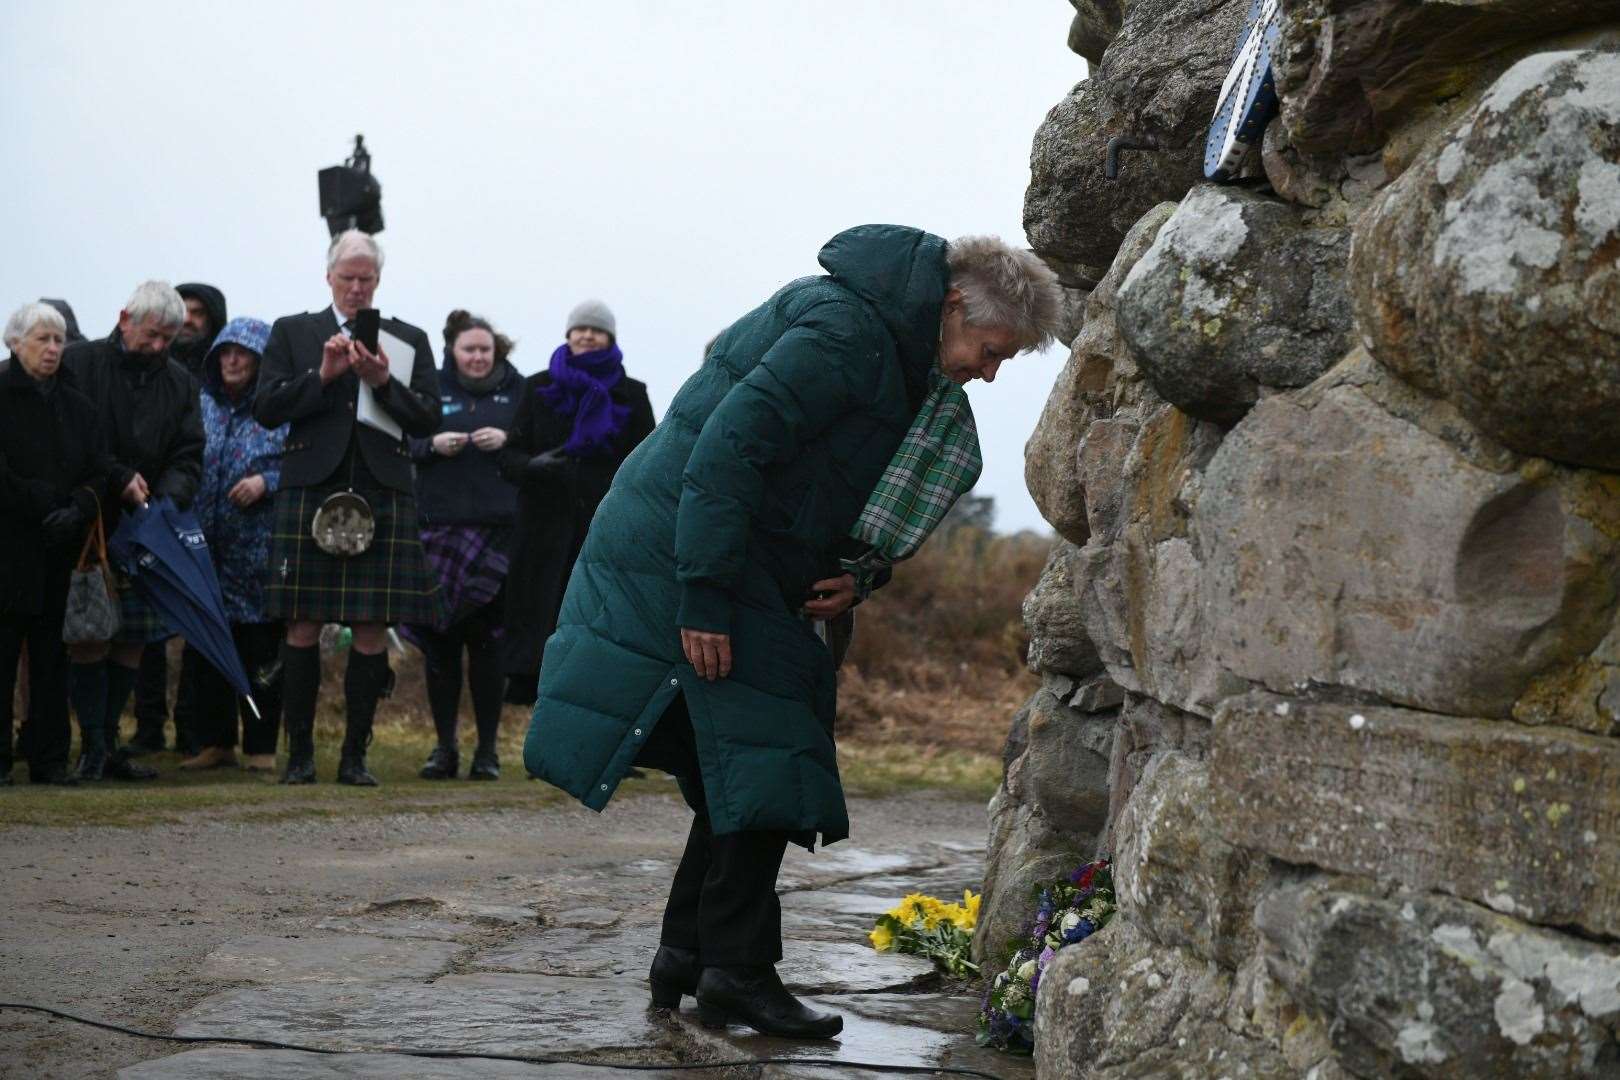 The laying of wreaths at the cairn.